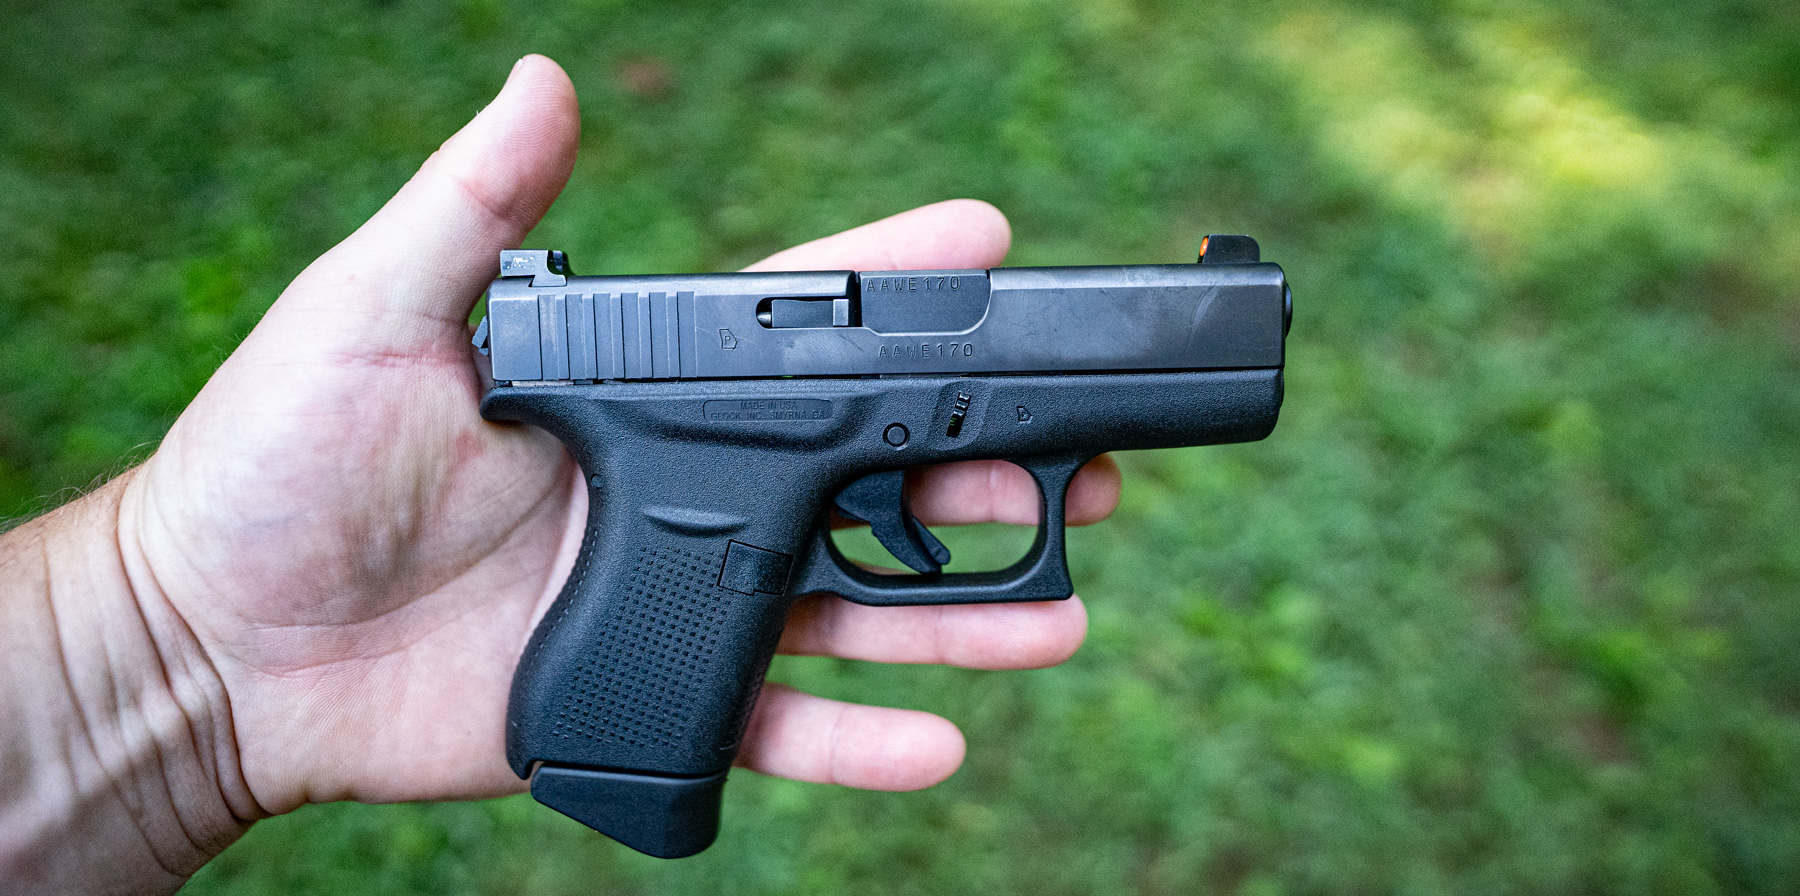 The Glock 42 held by a shooter in this photo is a popular concealed carry gun.